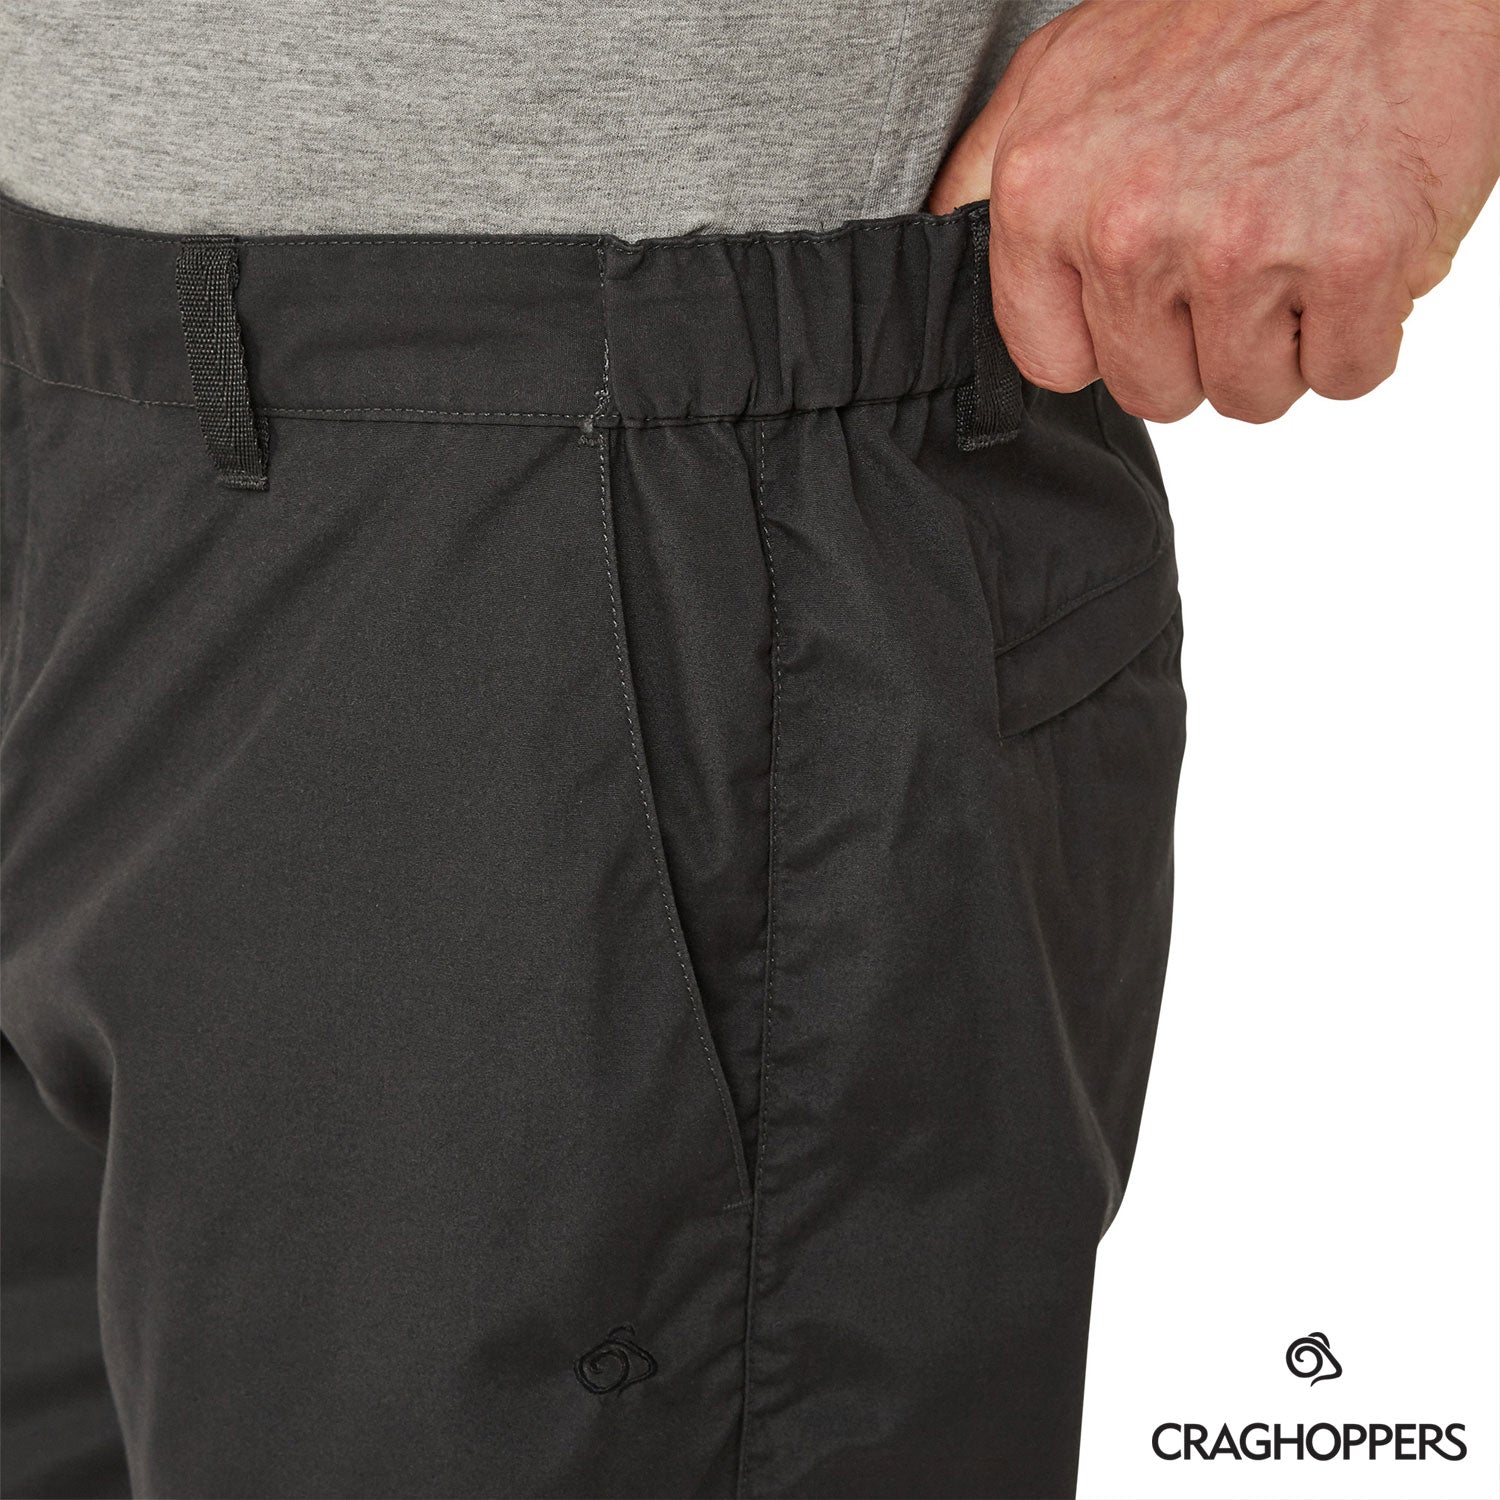 Craghoppers Boulder Trousers in Black Pepper